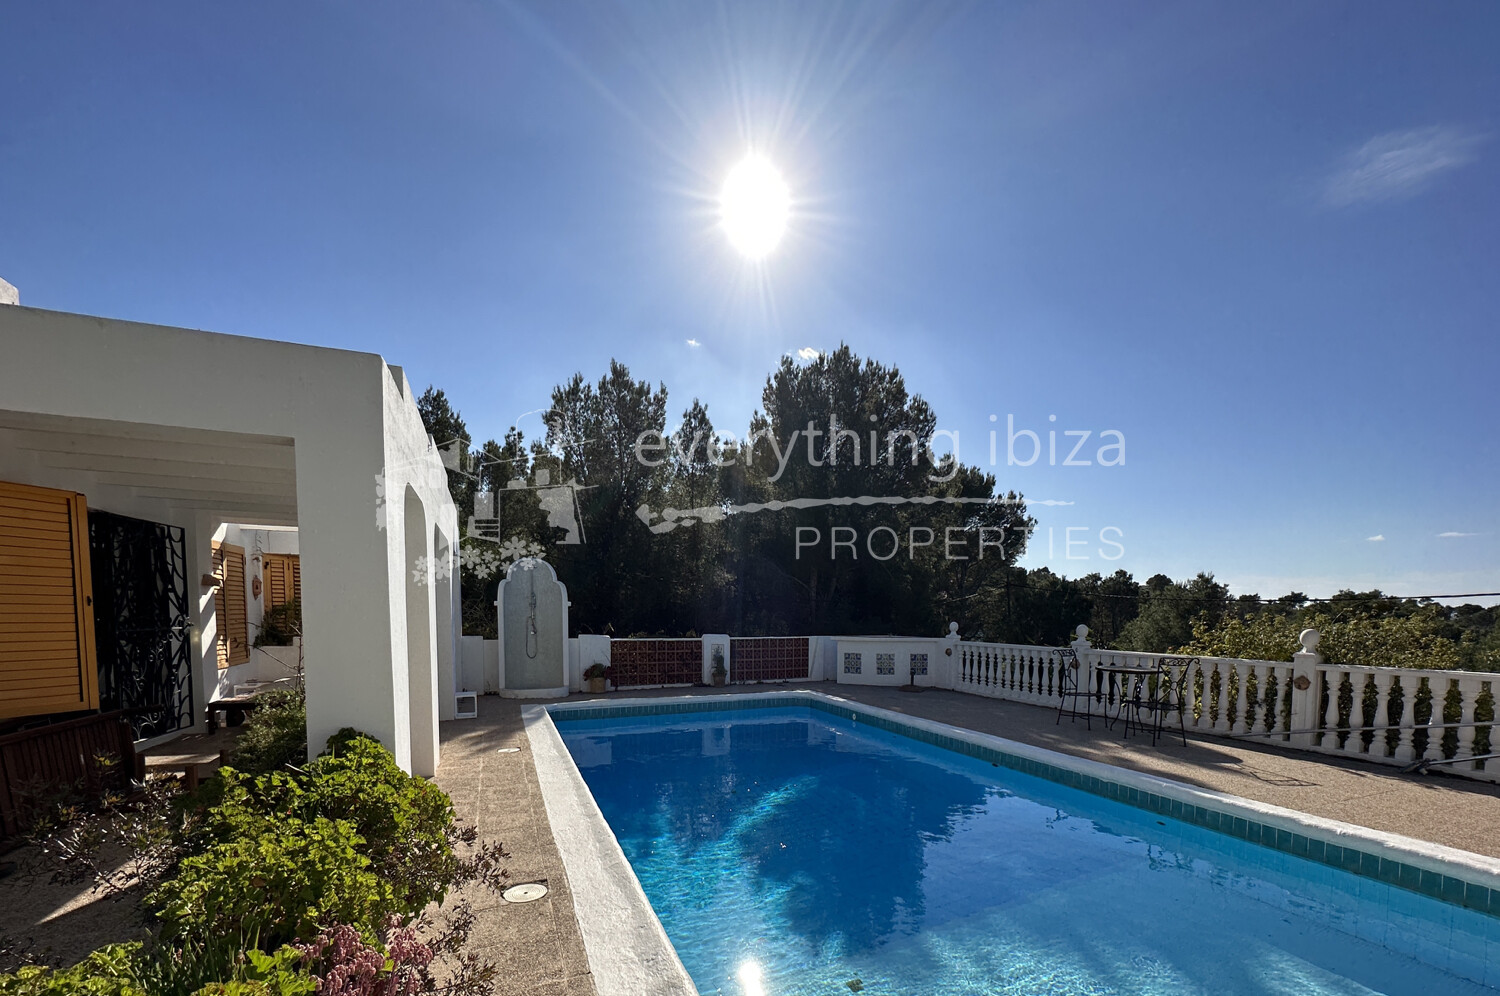 Charming Traditional Villa with Extra Plot & Views of Es Vedra, ref. 1521, for sale in Ibiza by everything ibiza Properties